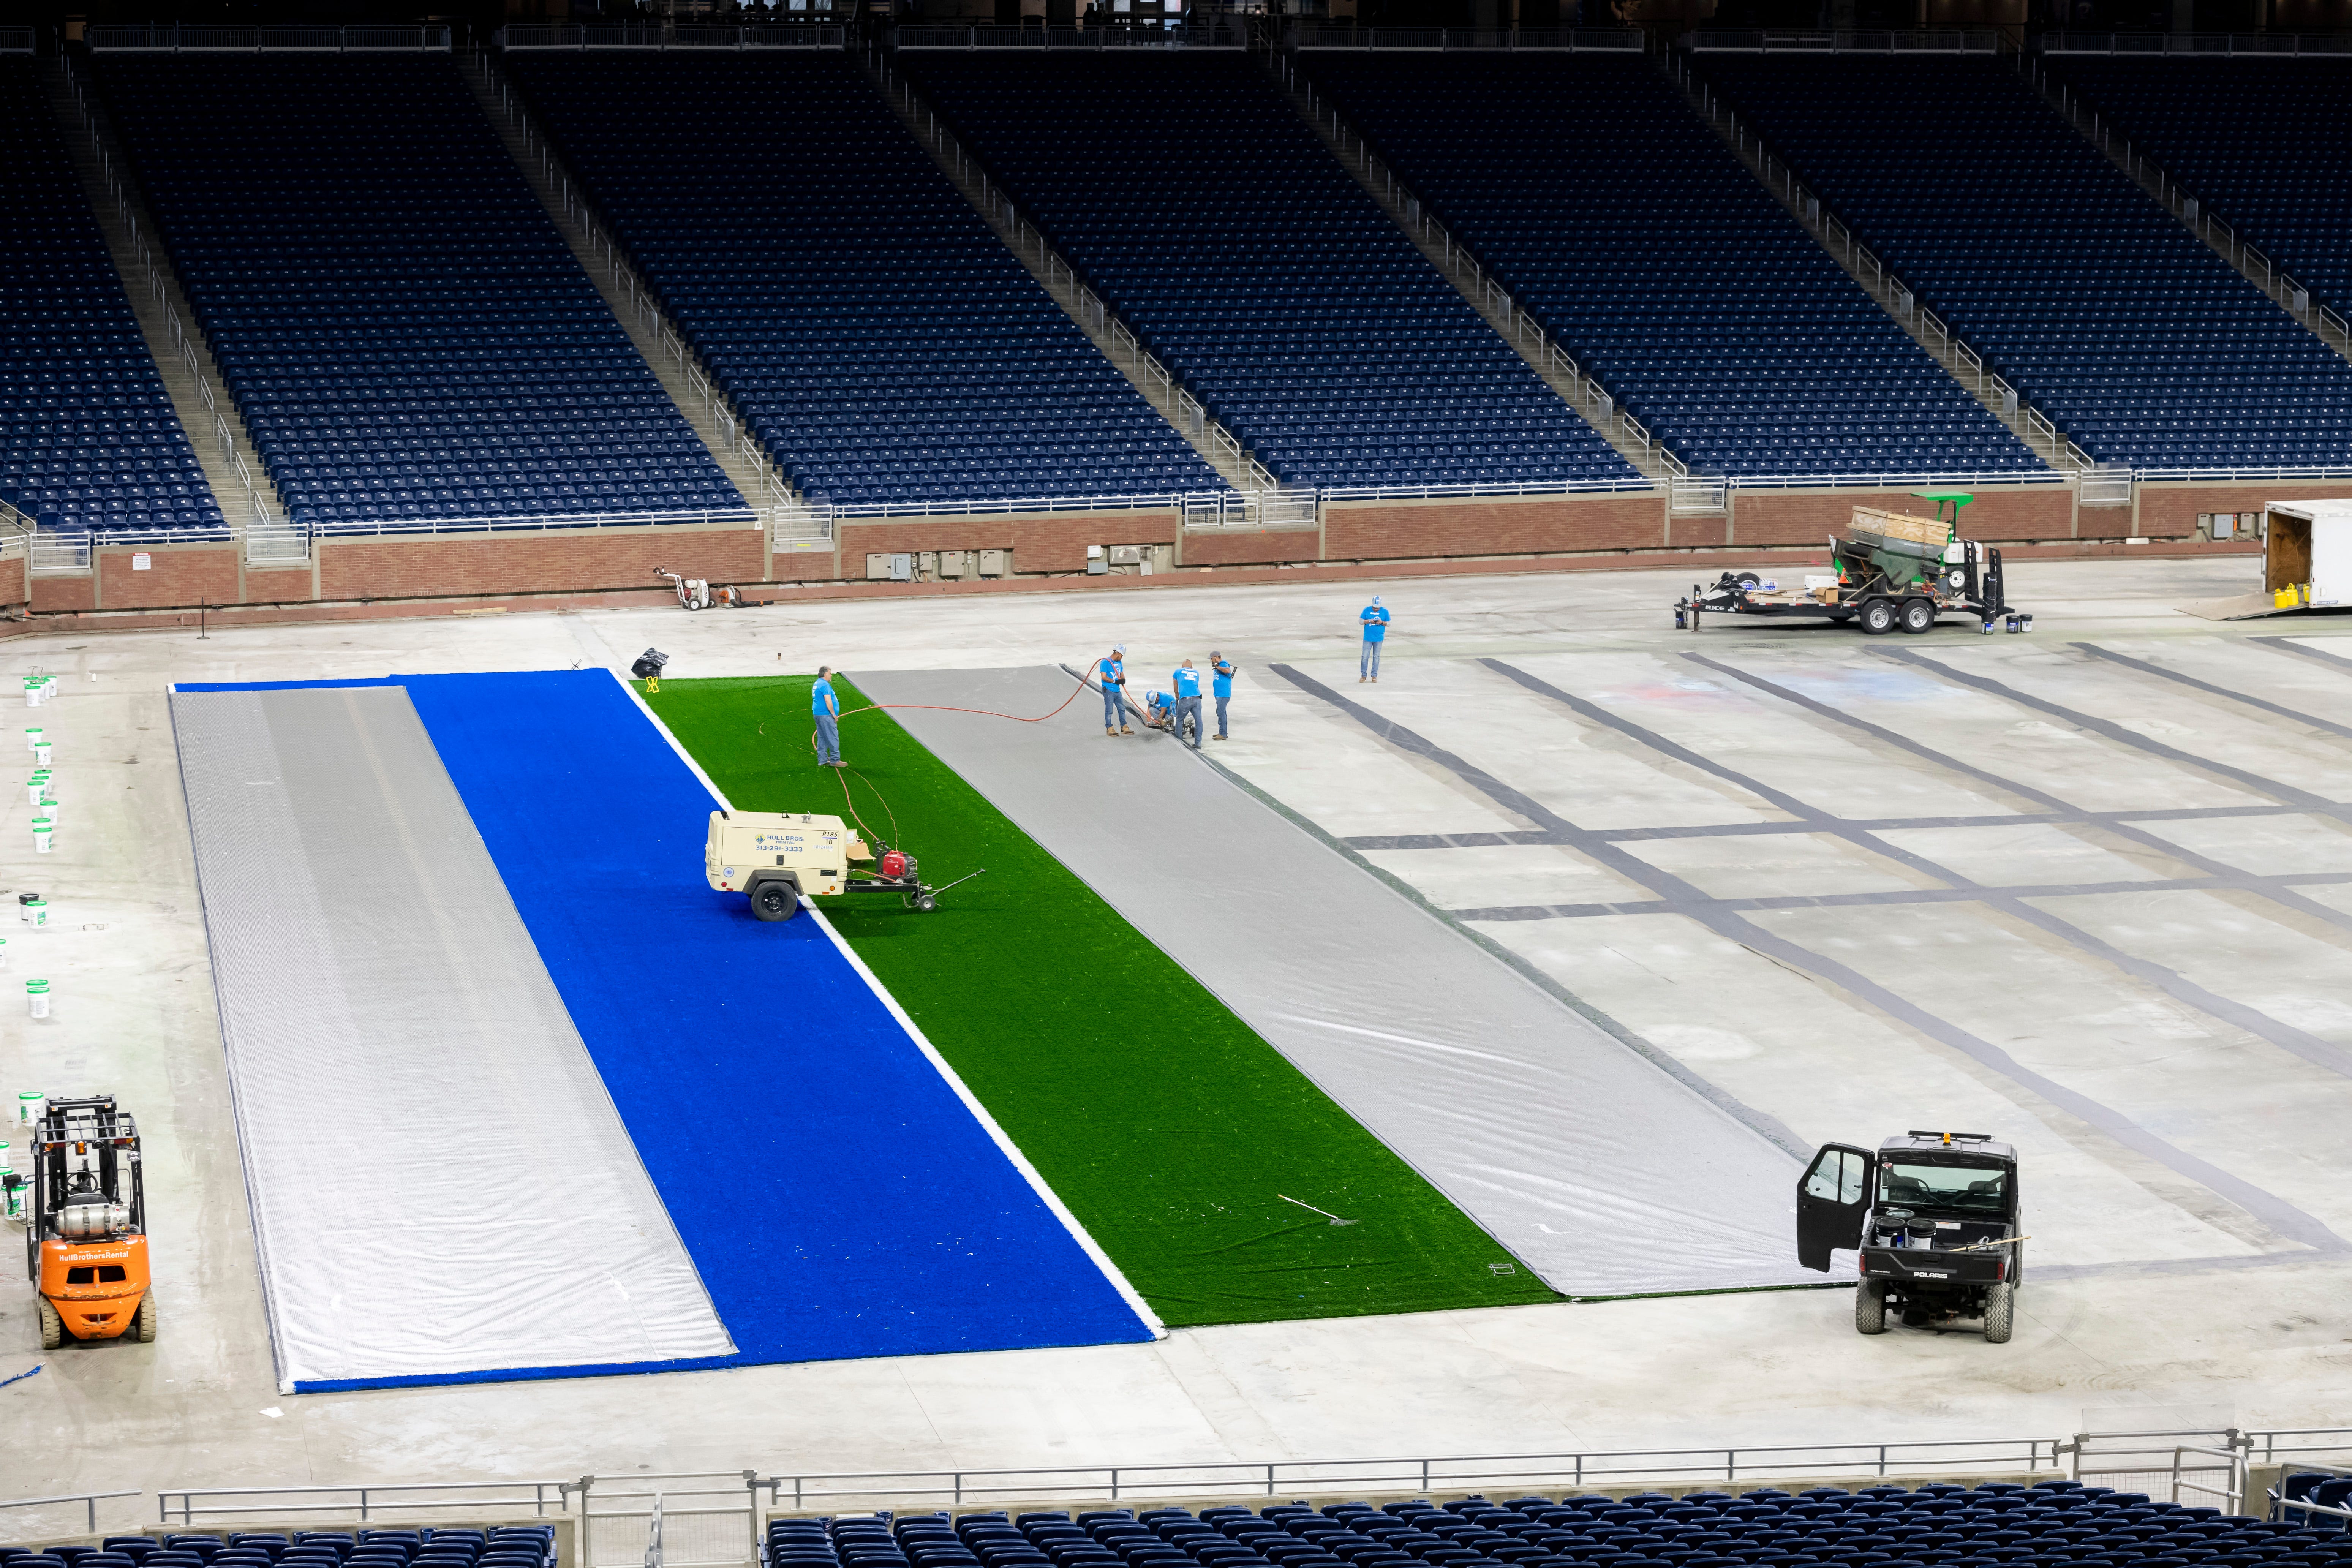 Employees from FieldTurf install a new playing surface at Ford Field.